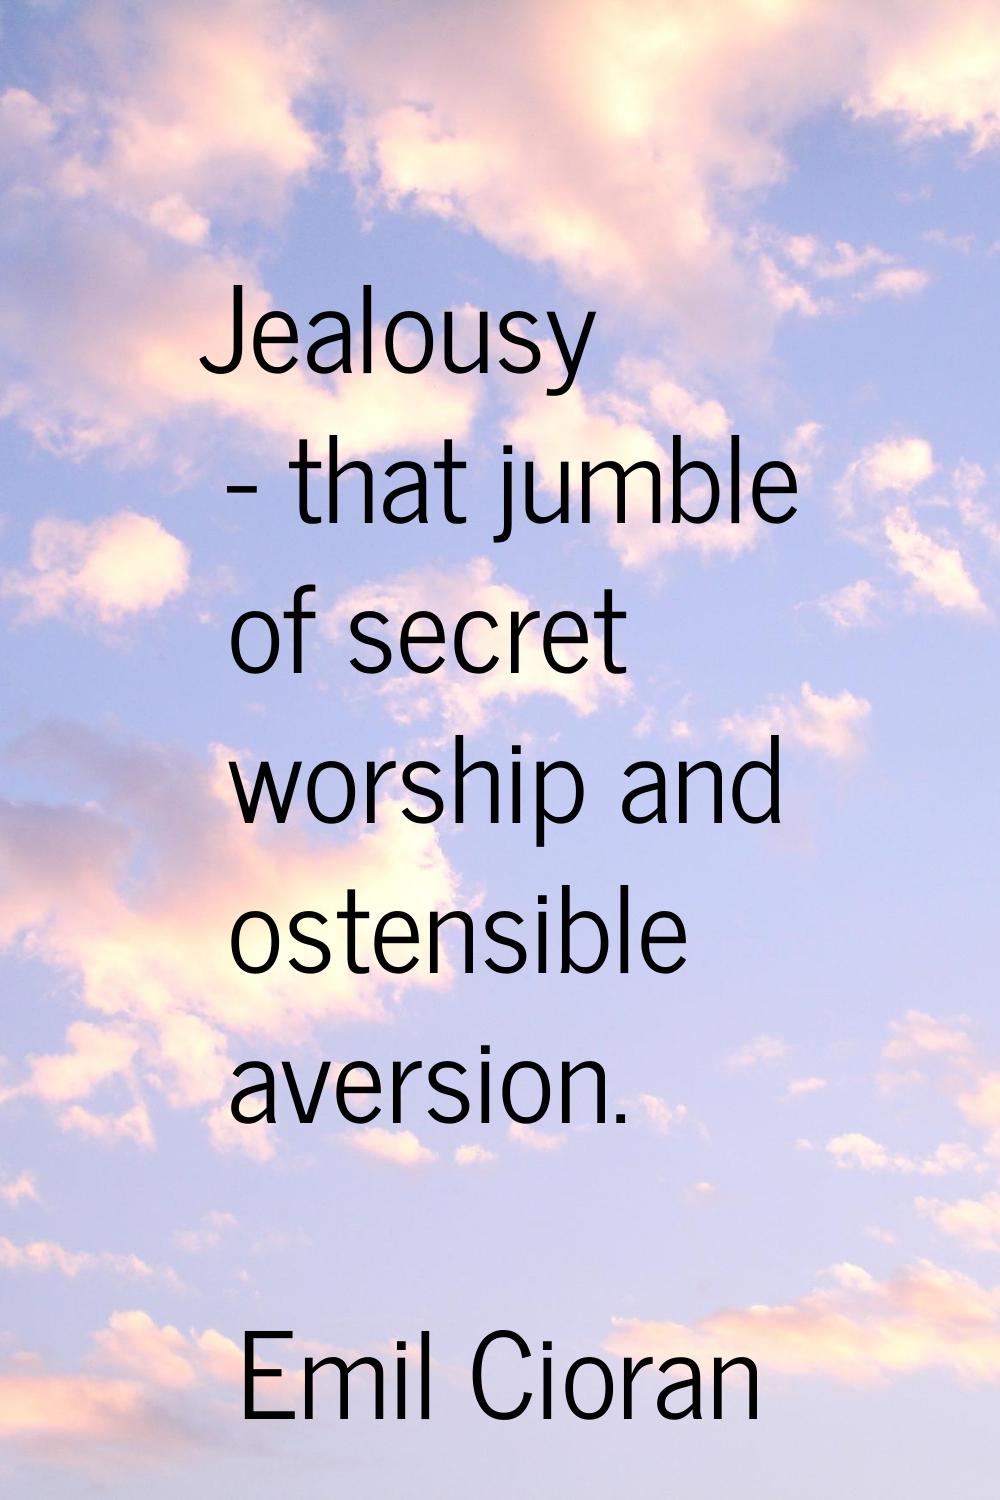 Jealousy - that jumble of secret worship and ostensible aversion.